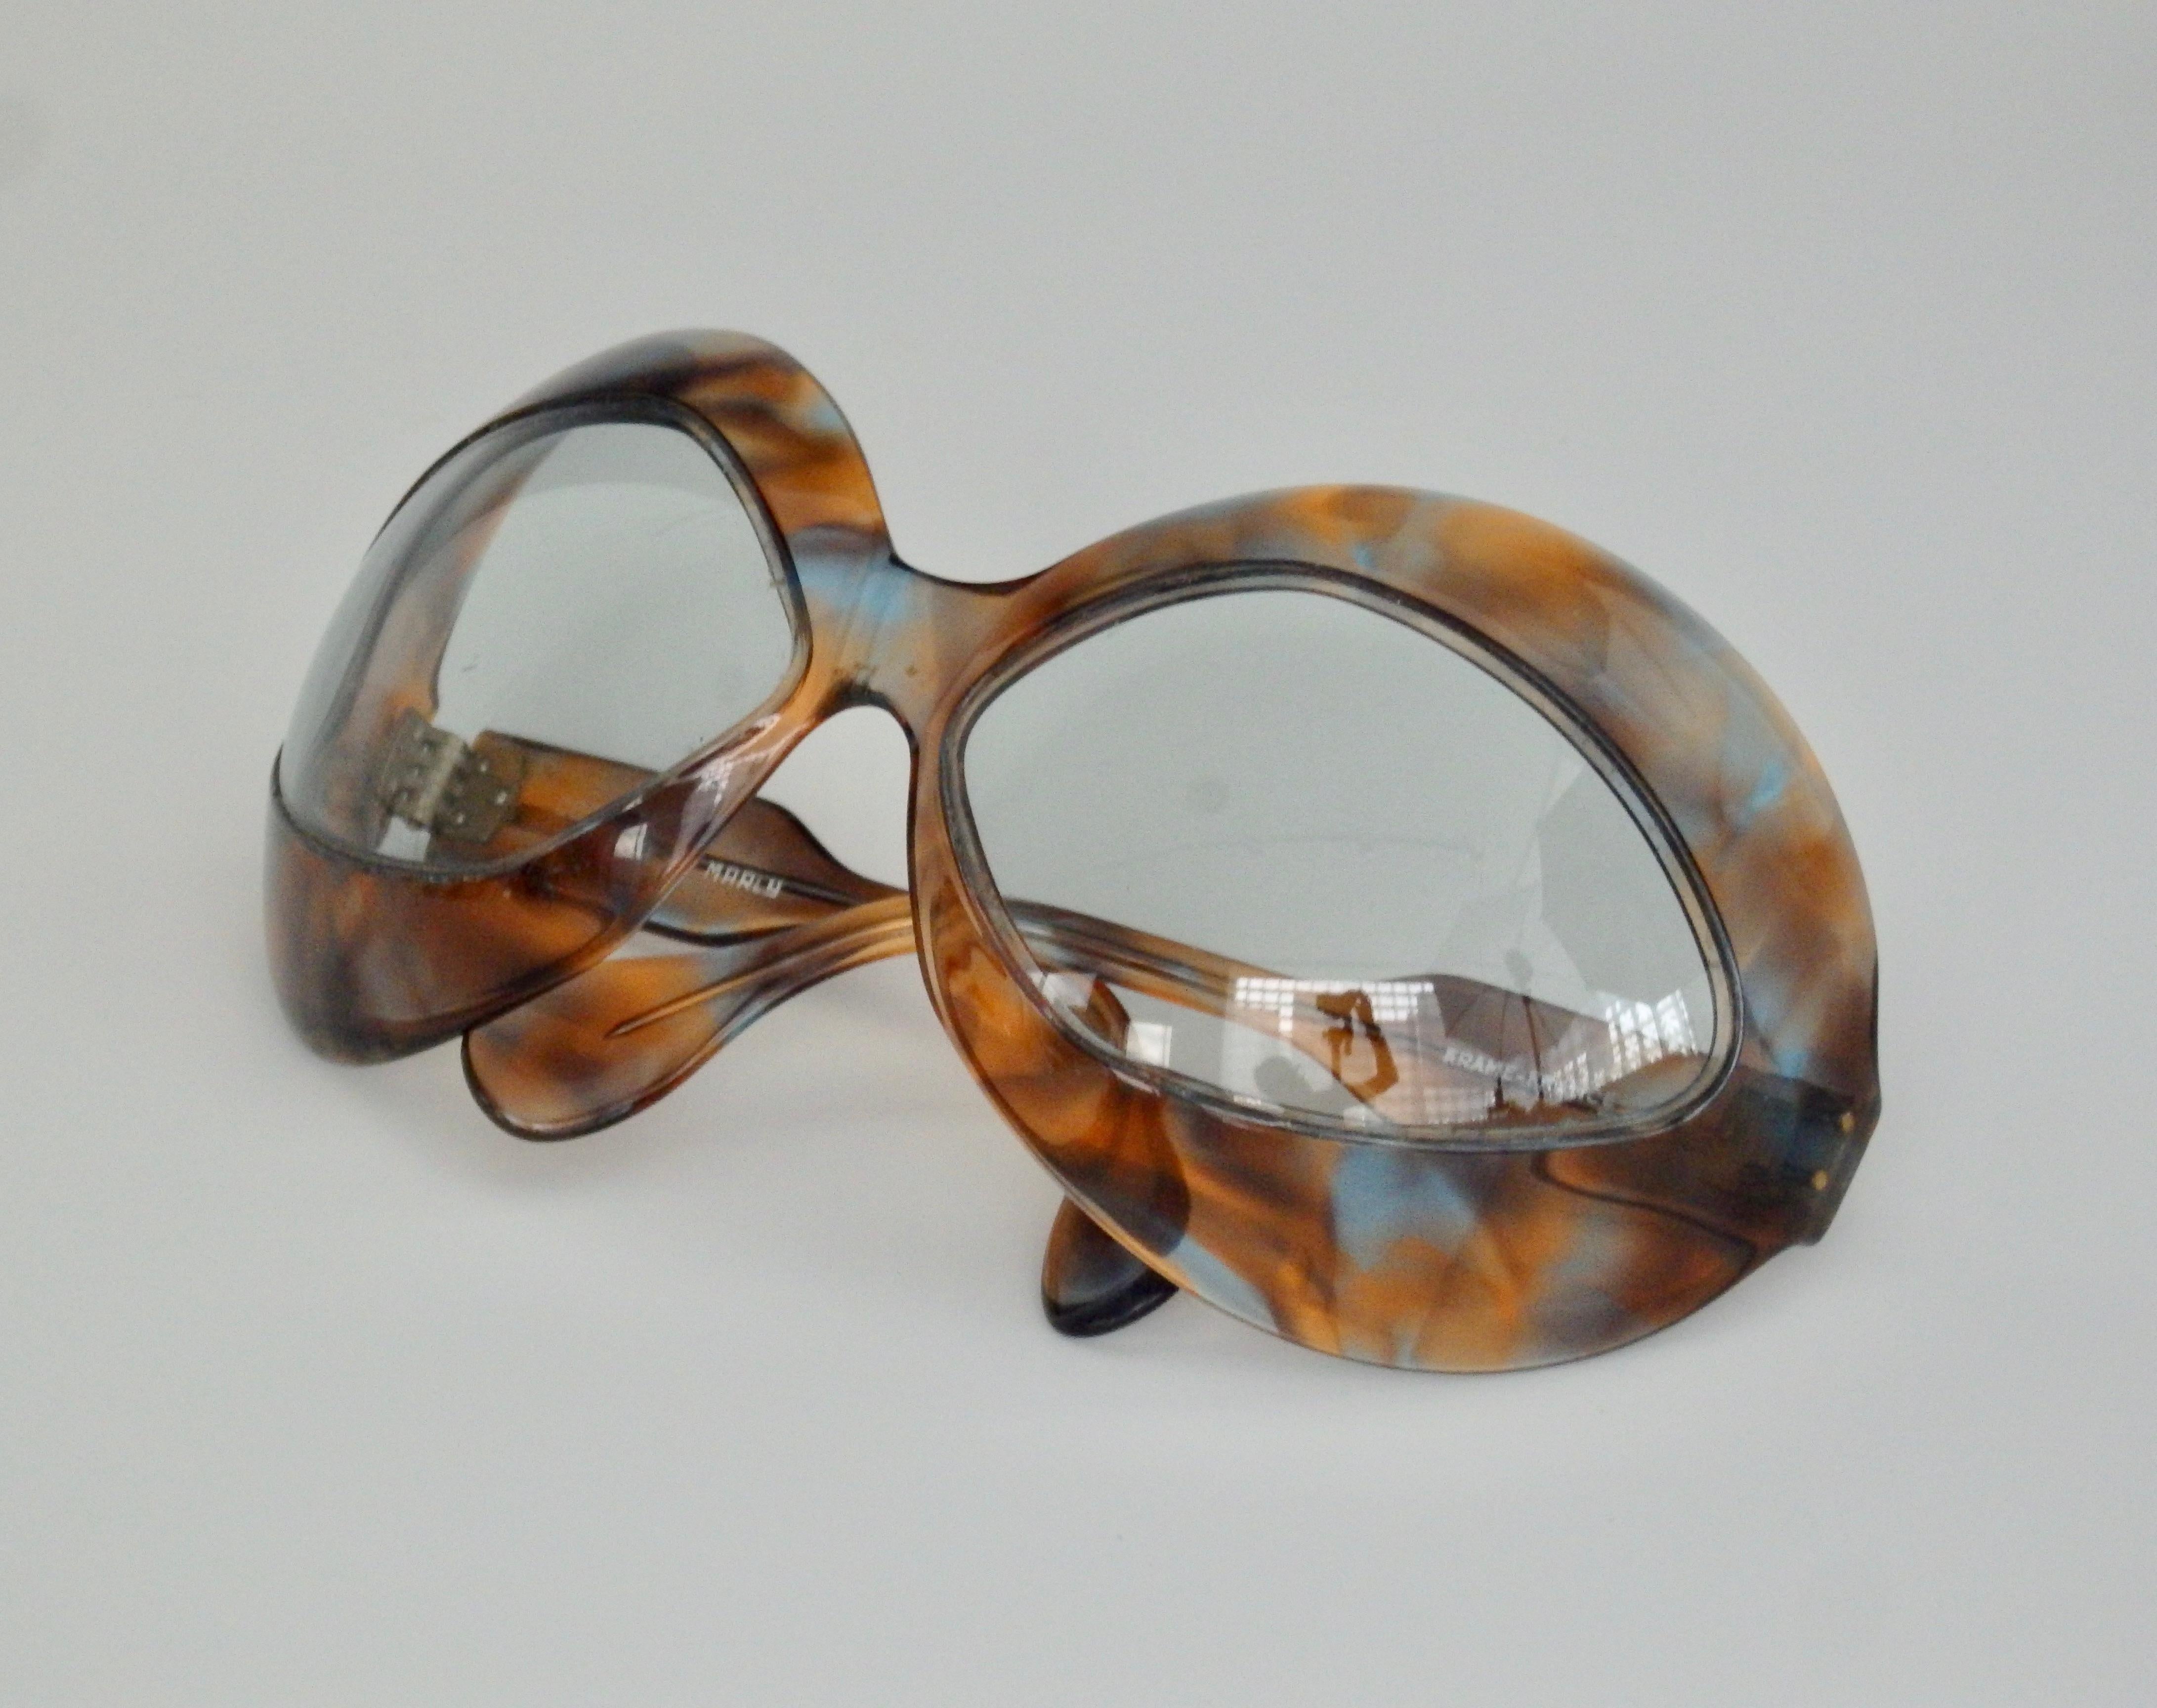 Pierre Marly cocktail sunglasses with a futuristic, avant-garde, oversized tortoiseshell frame. Made In France.
Measures: Hinge to hinge 5.25